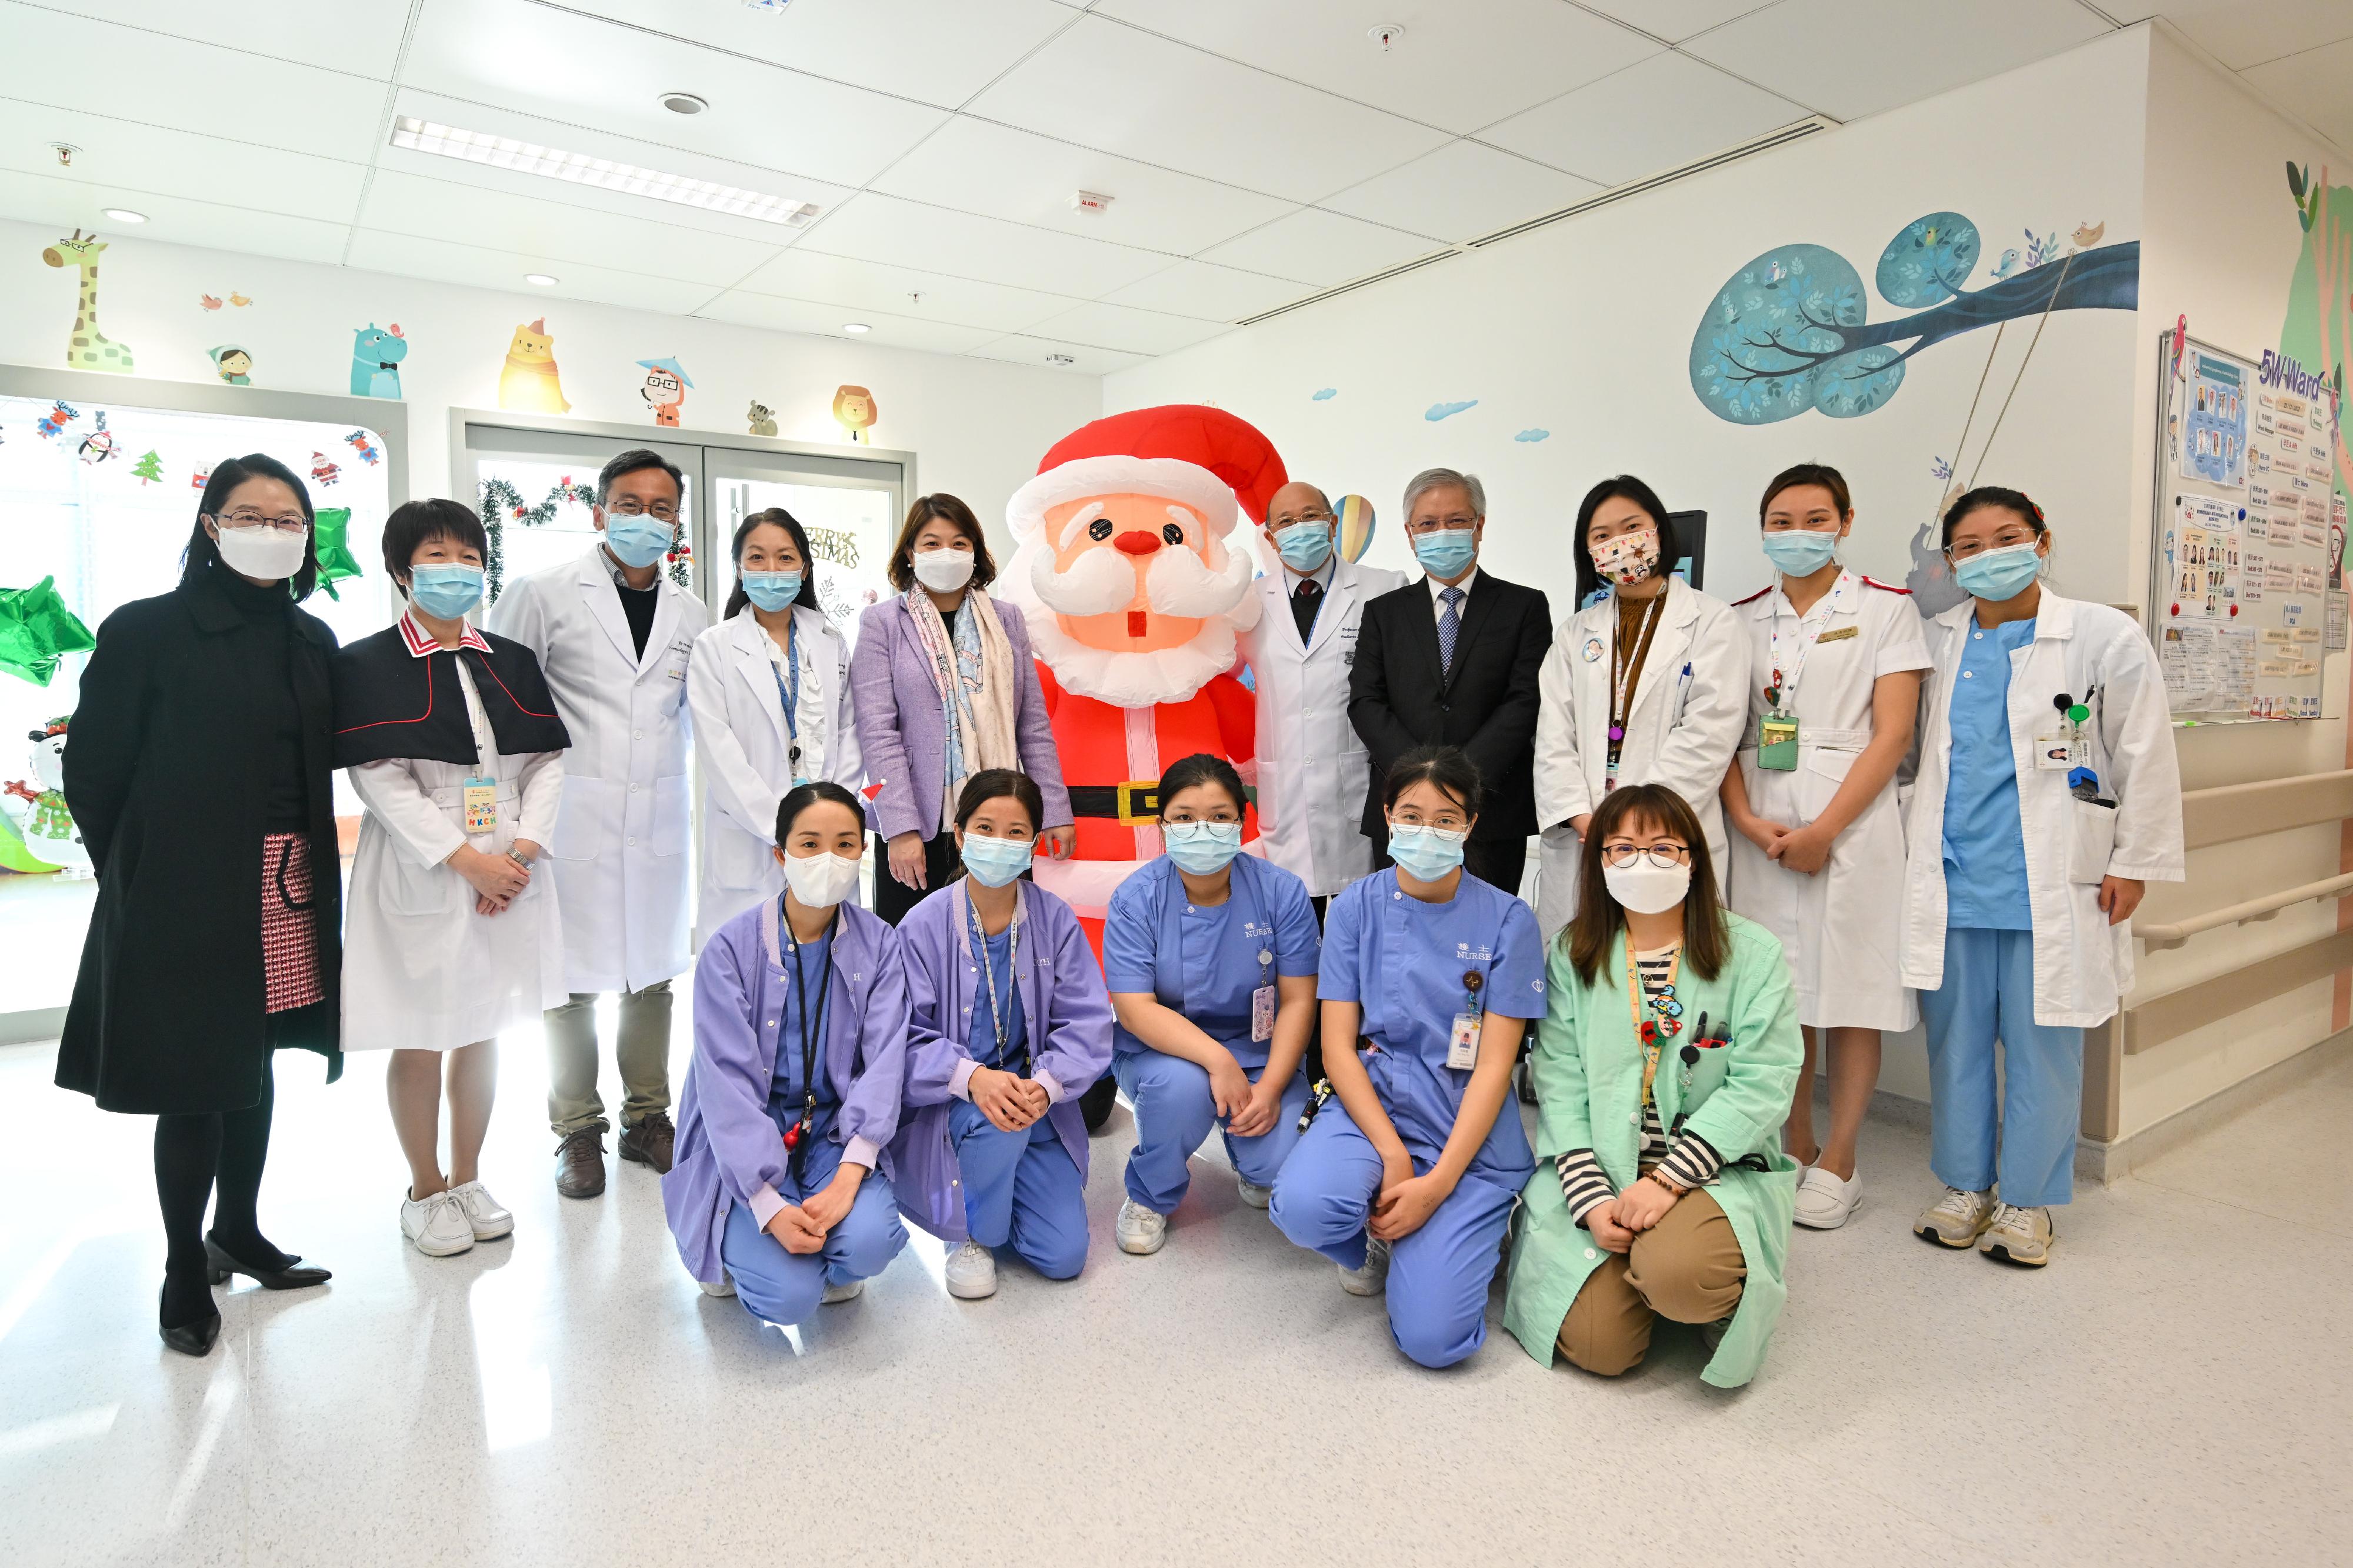 The Under Secretary for Health, Dr Libby Lee, visited Hong Kong Children's Hospital (HKCH) today (December 23). Photo shows Dr Libby Lee (fifth left, back row) and the Hospital Chief Executive of HKCH, Dr Lee Tsz-leung (fourth right, back row), in a group photo with the medical team of haematology and oncology of HKCH.